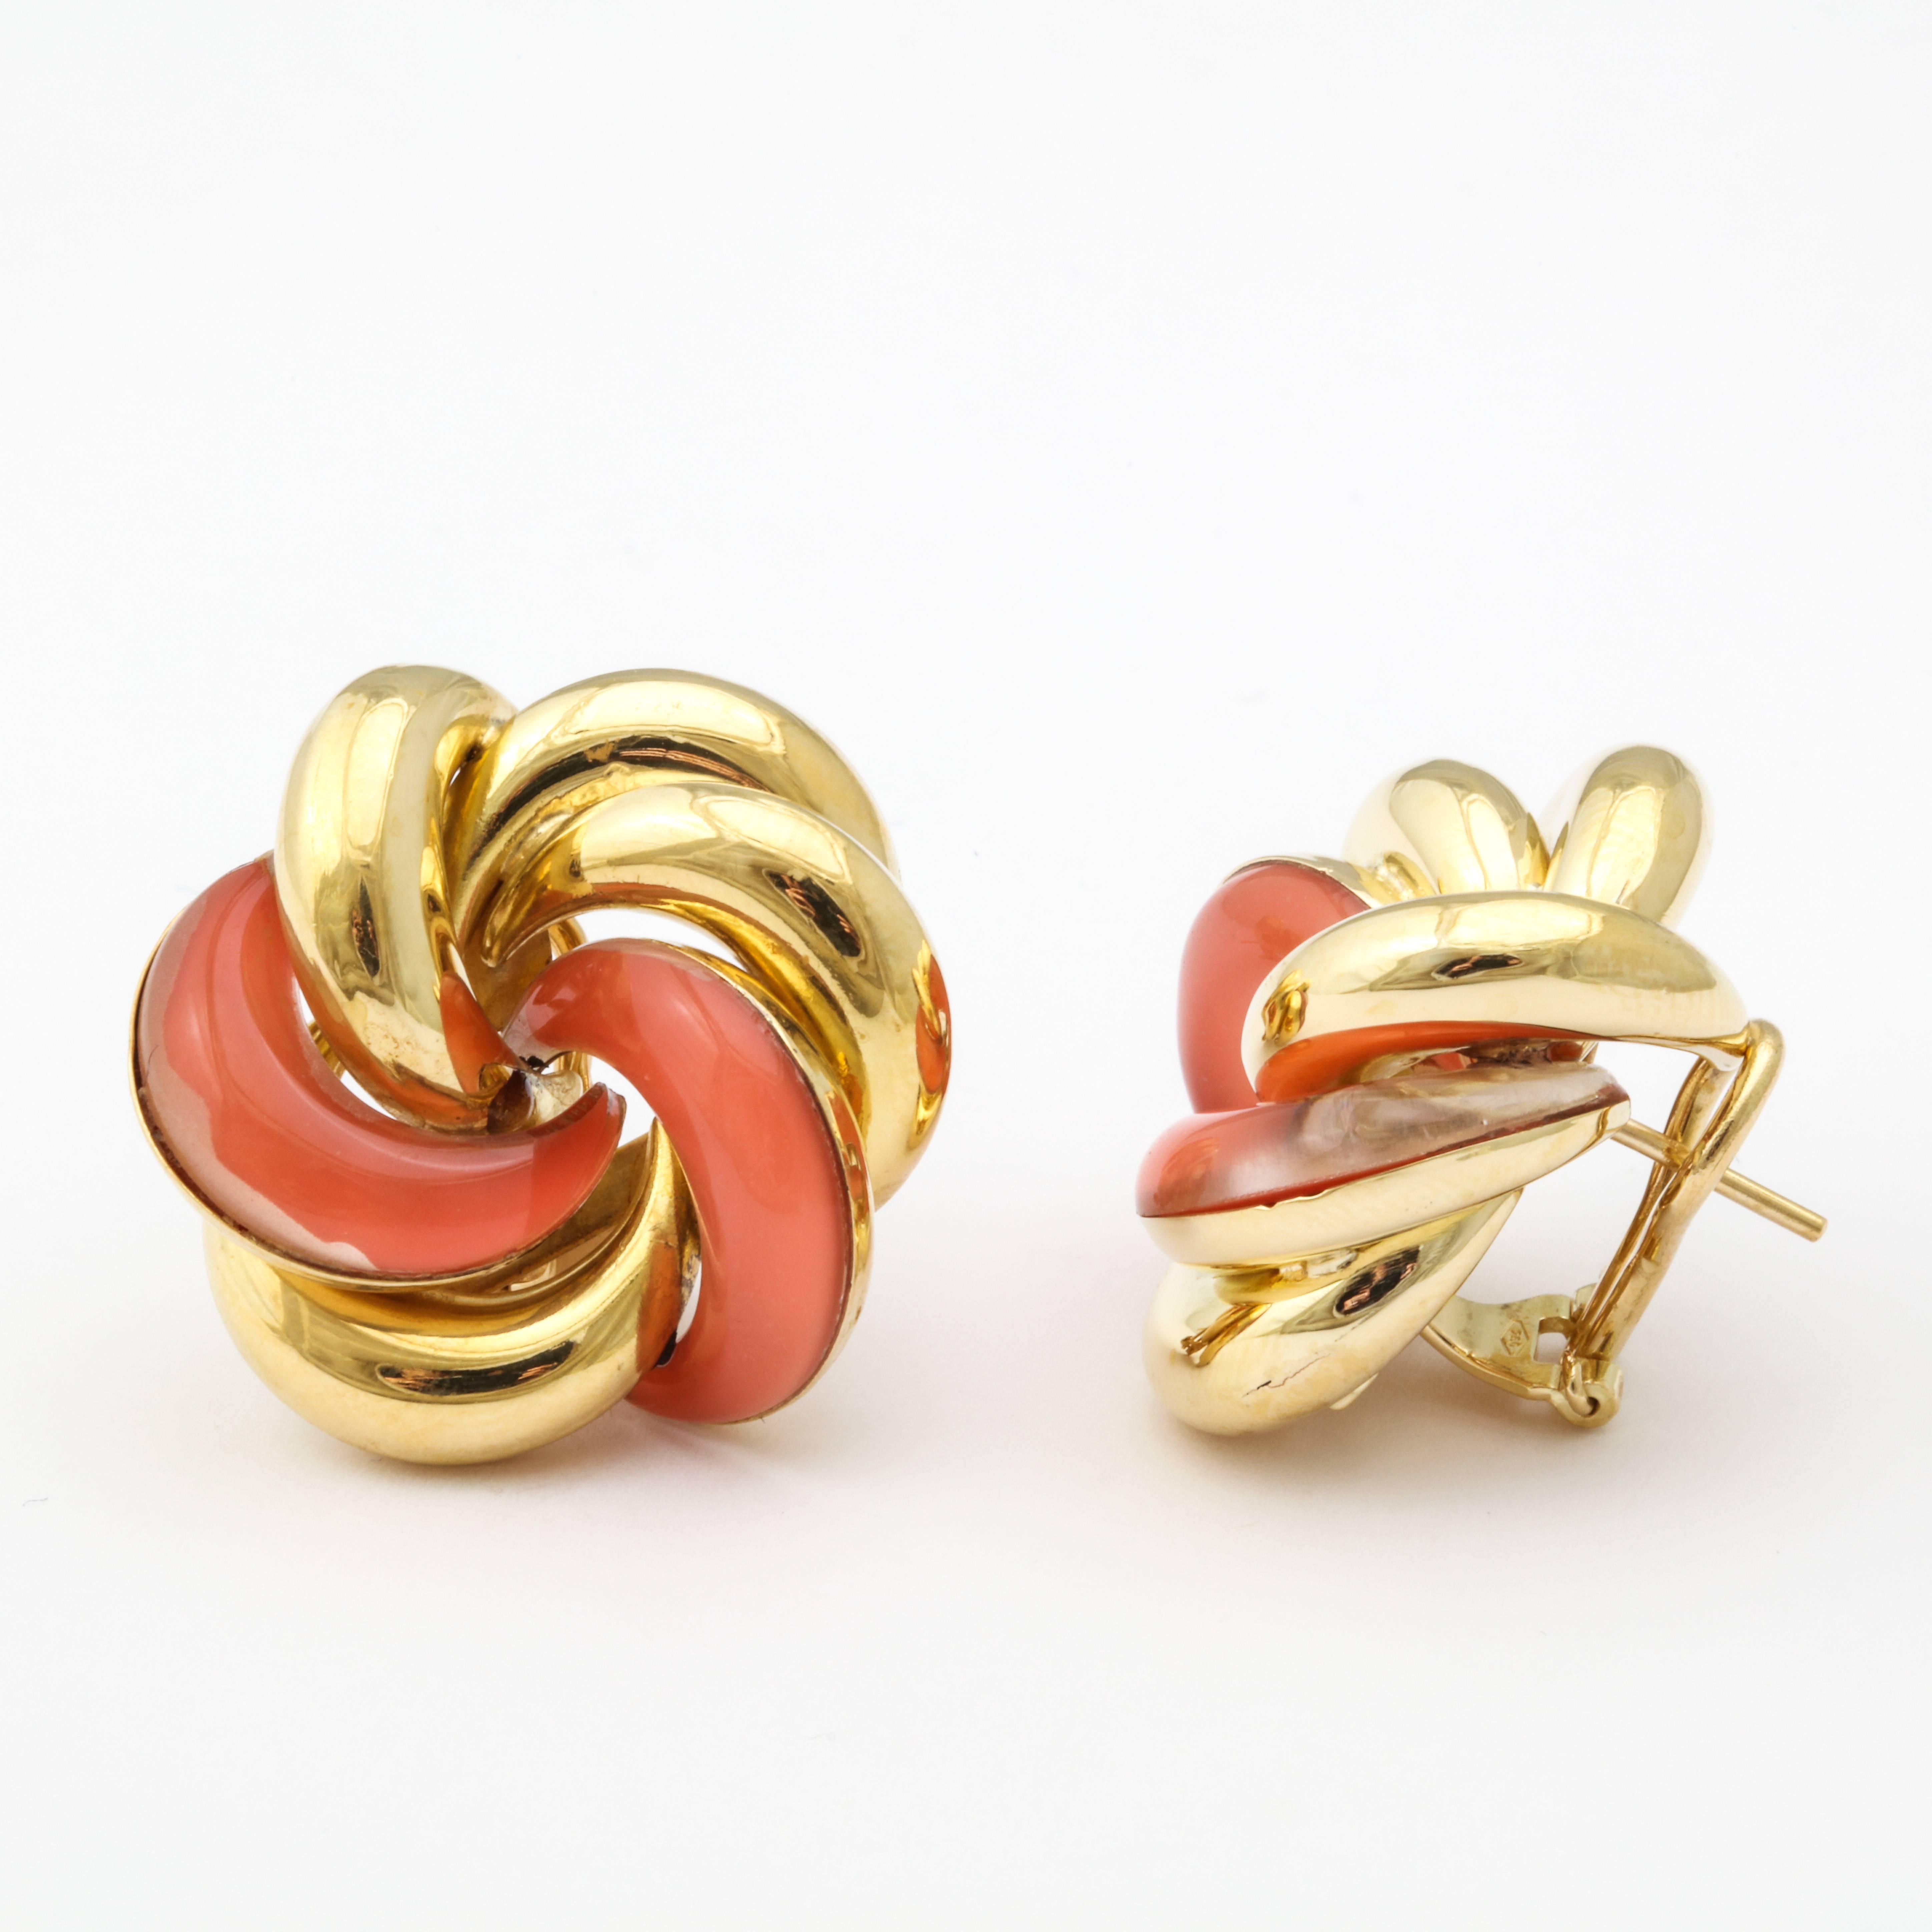 18k Italian yellow gold earrings set with coral stones.